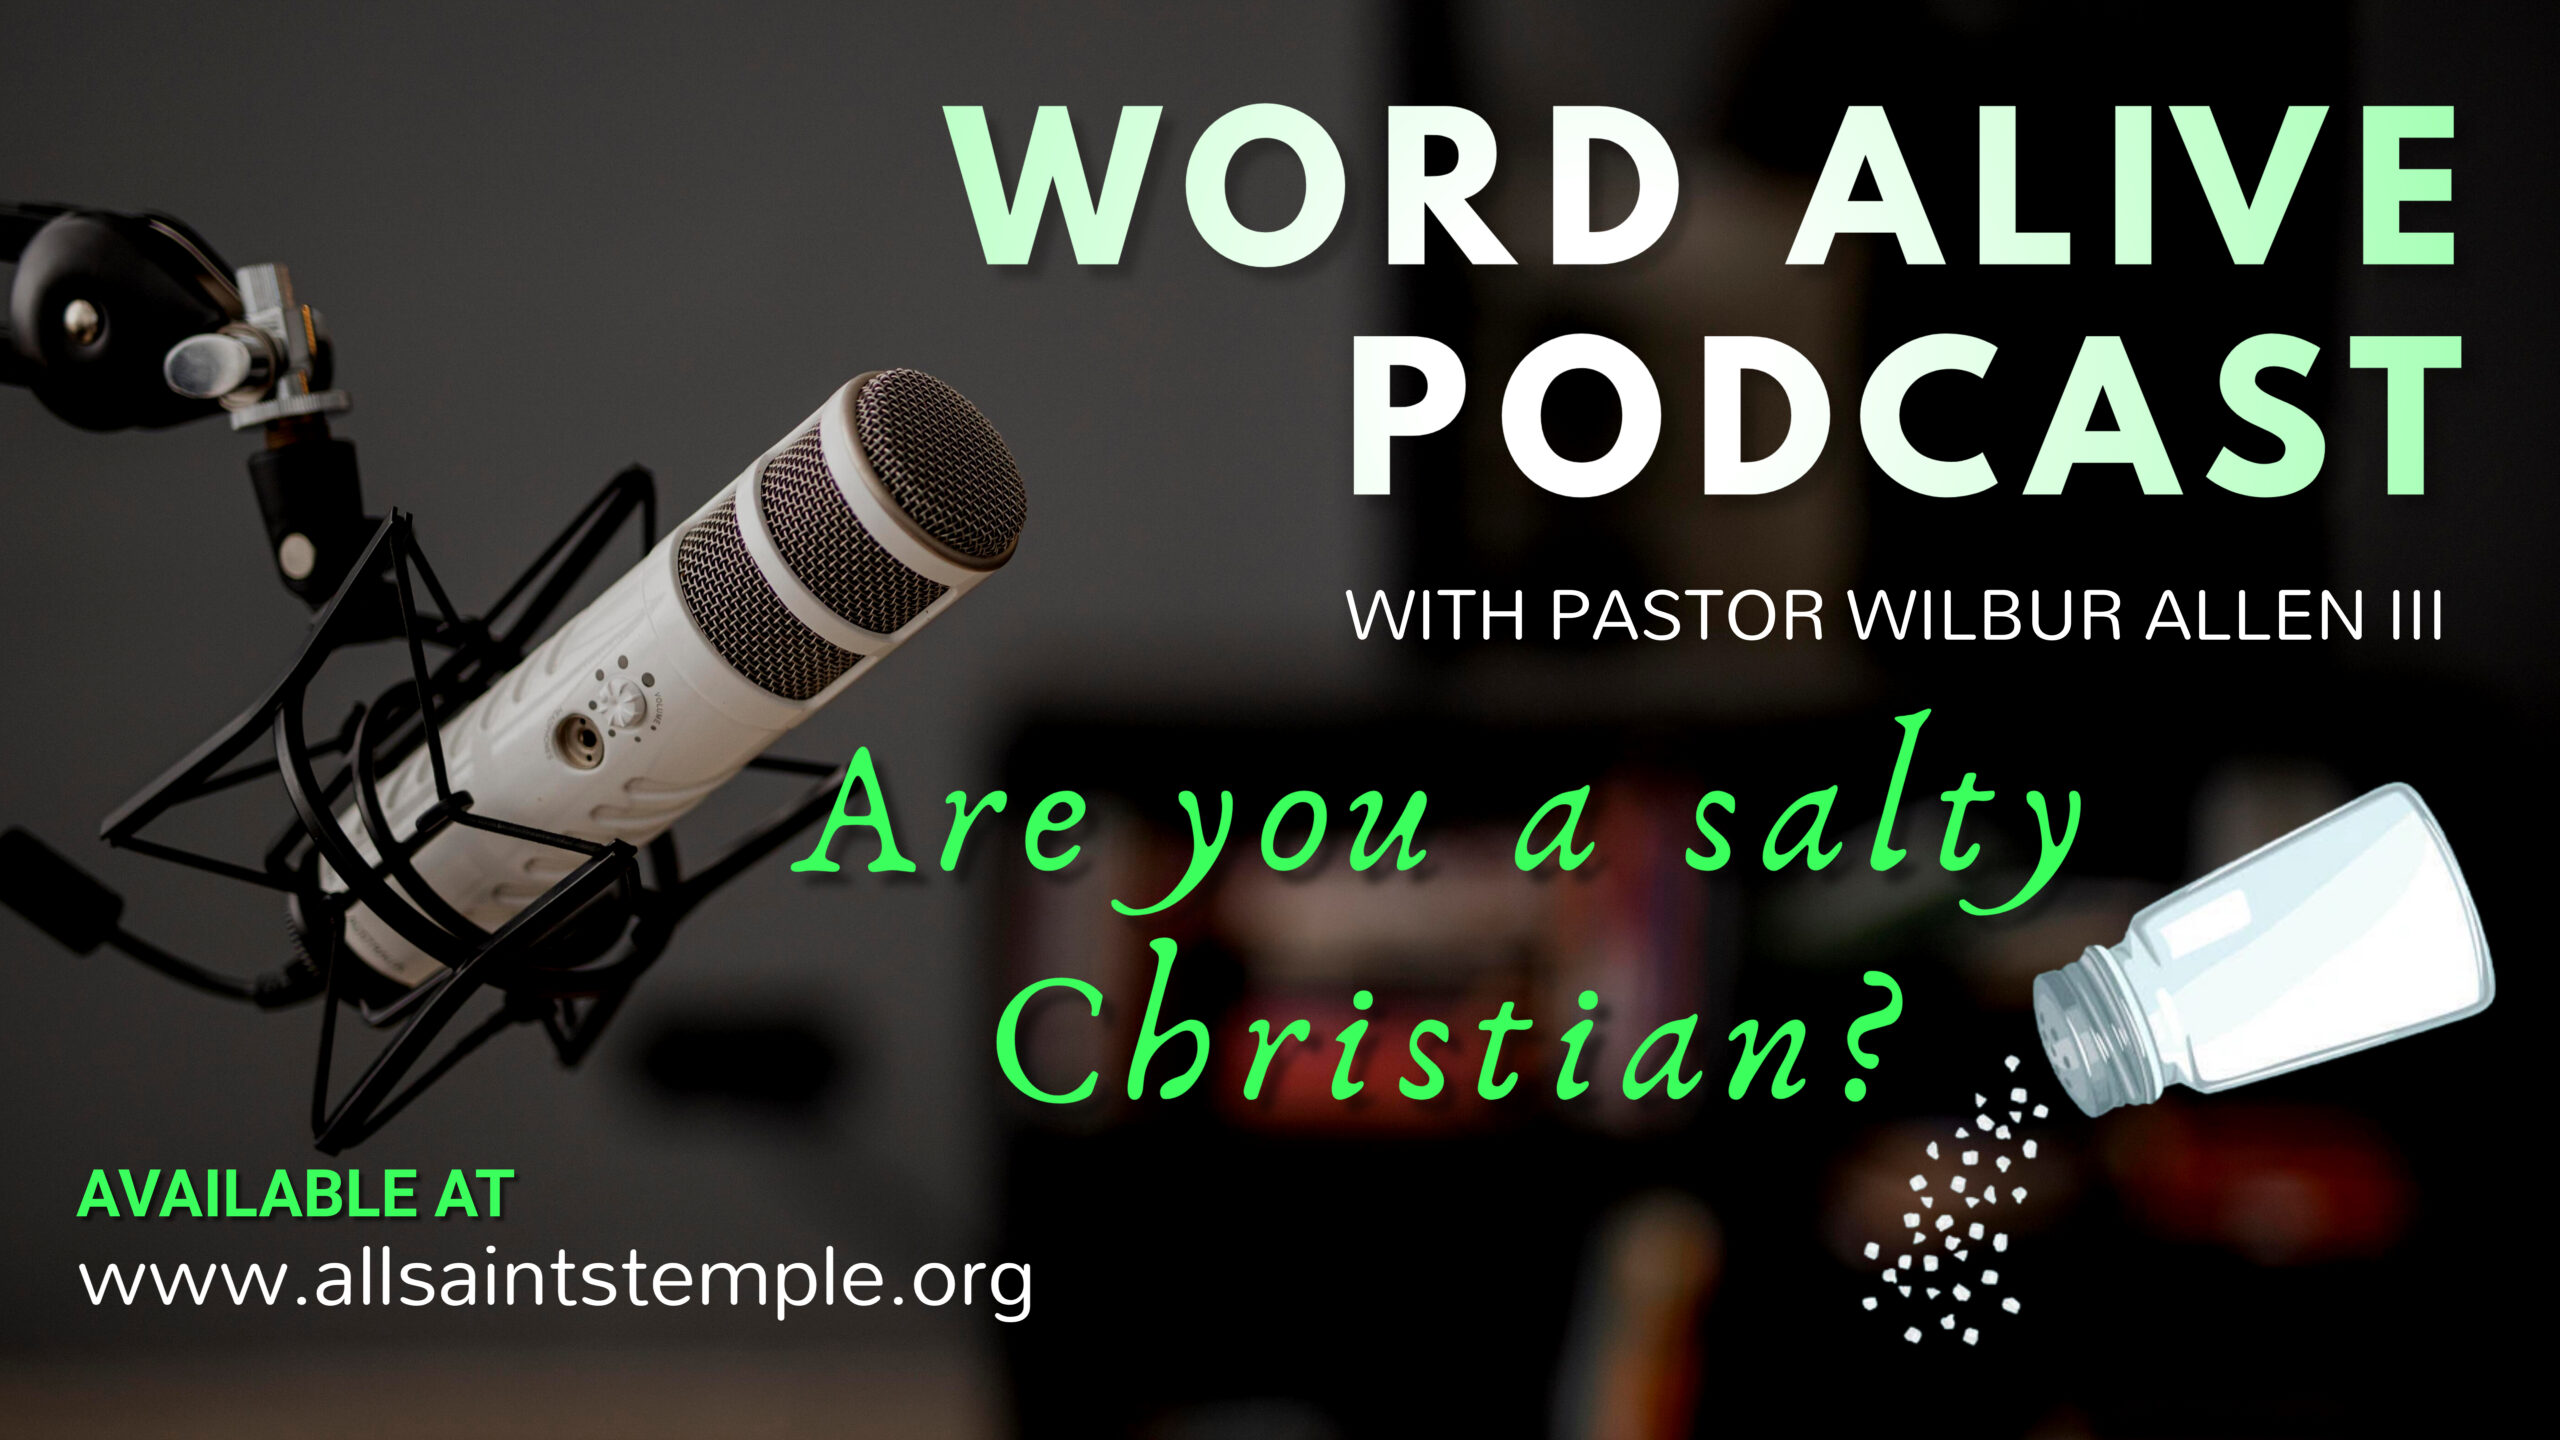 Word Alive Podcast - Are You a Salty Christian?